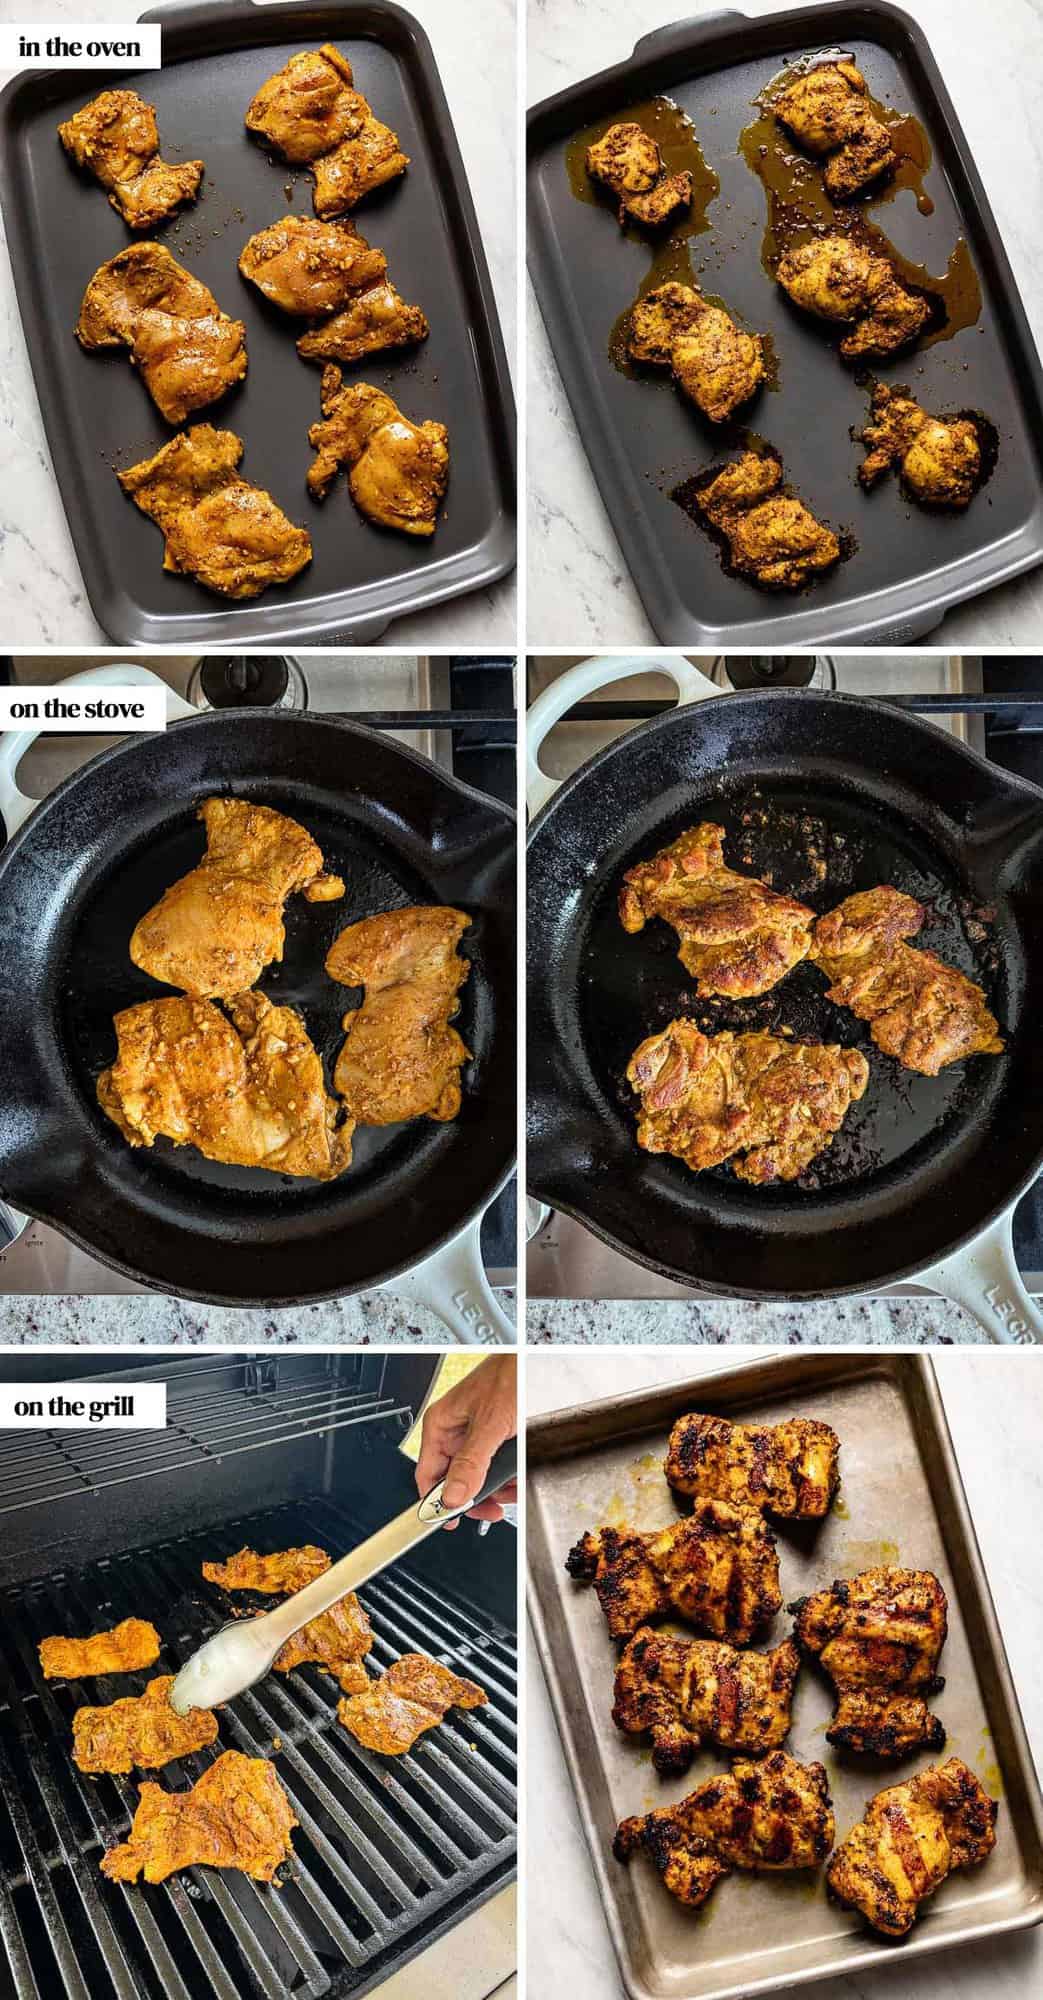 A collage of images showing how to cook shawarma chicken in the oven, on the stove and on the grill.